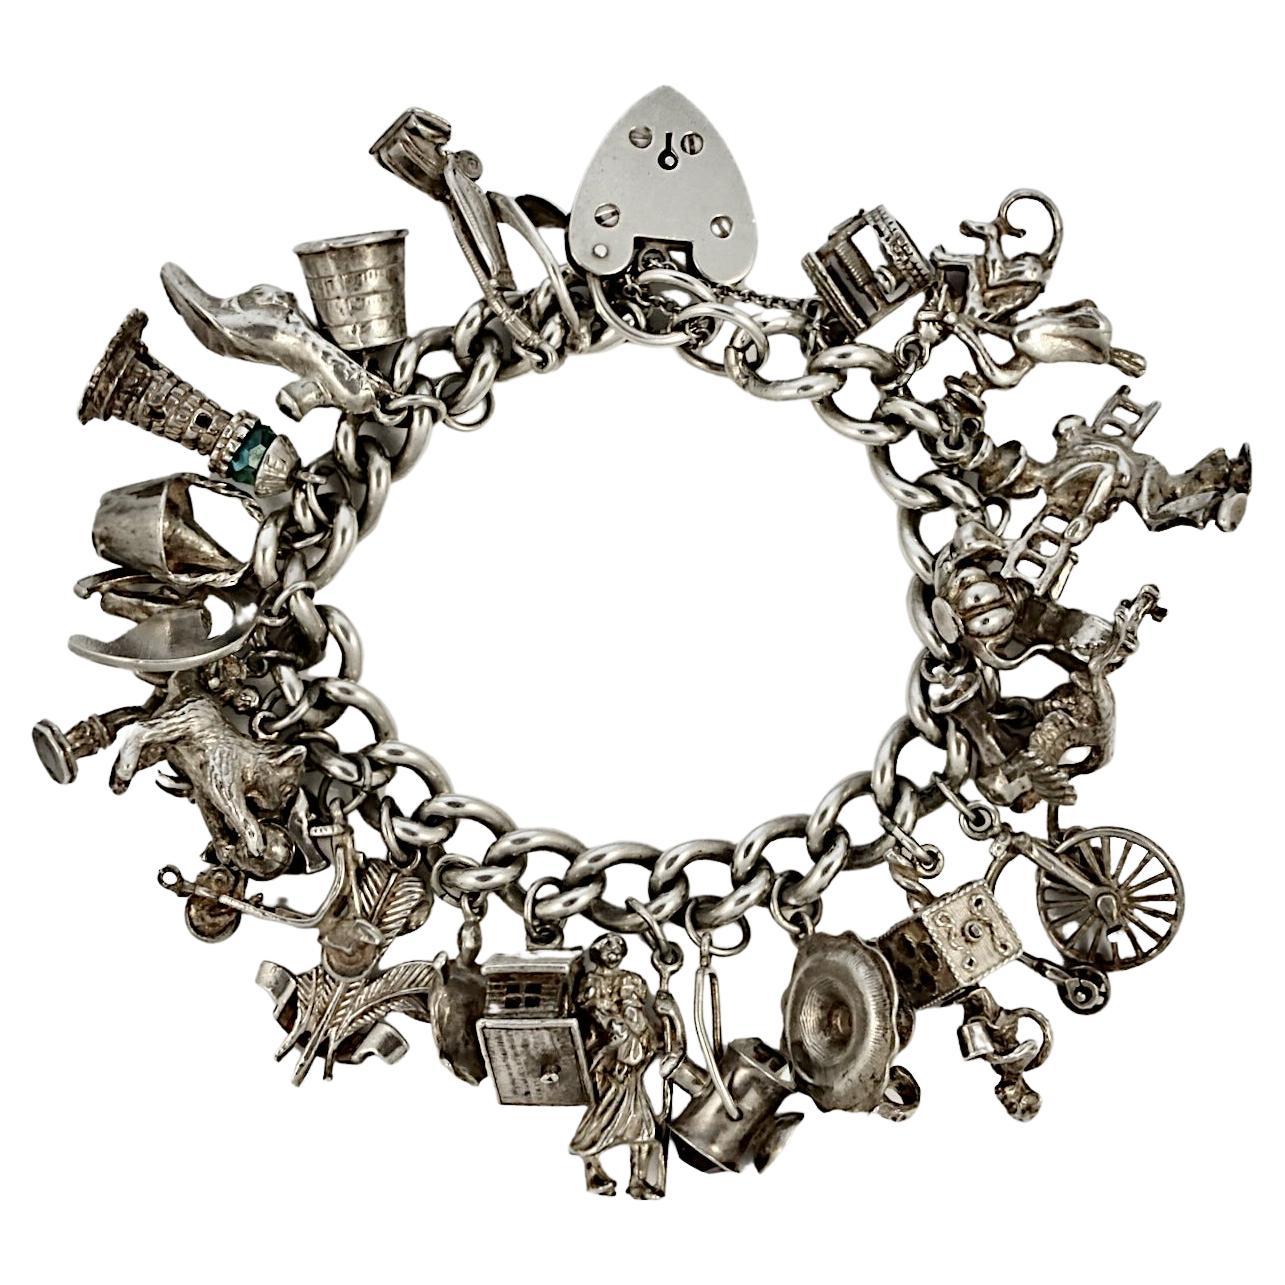 English Sterling Silver Charm Bracelet with Heart Lock 1960s